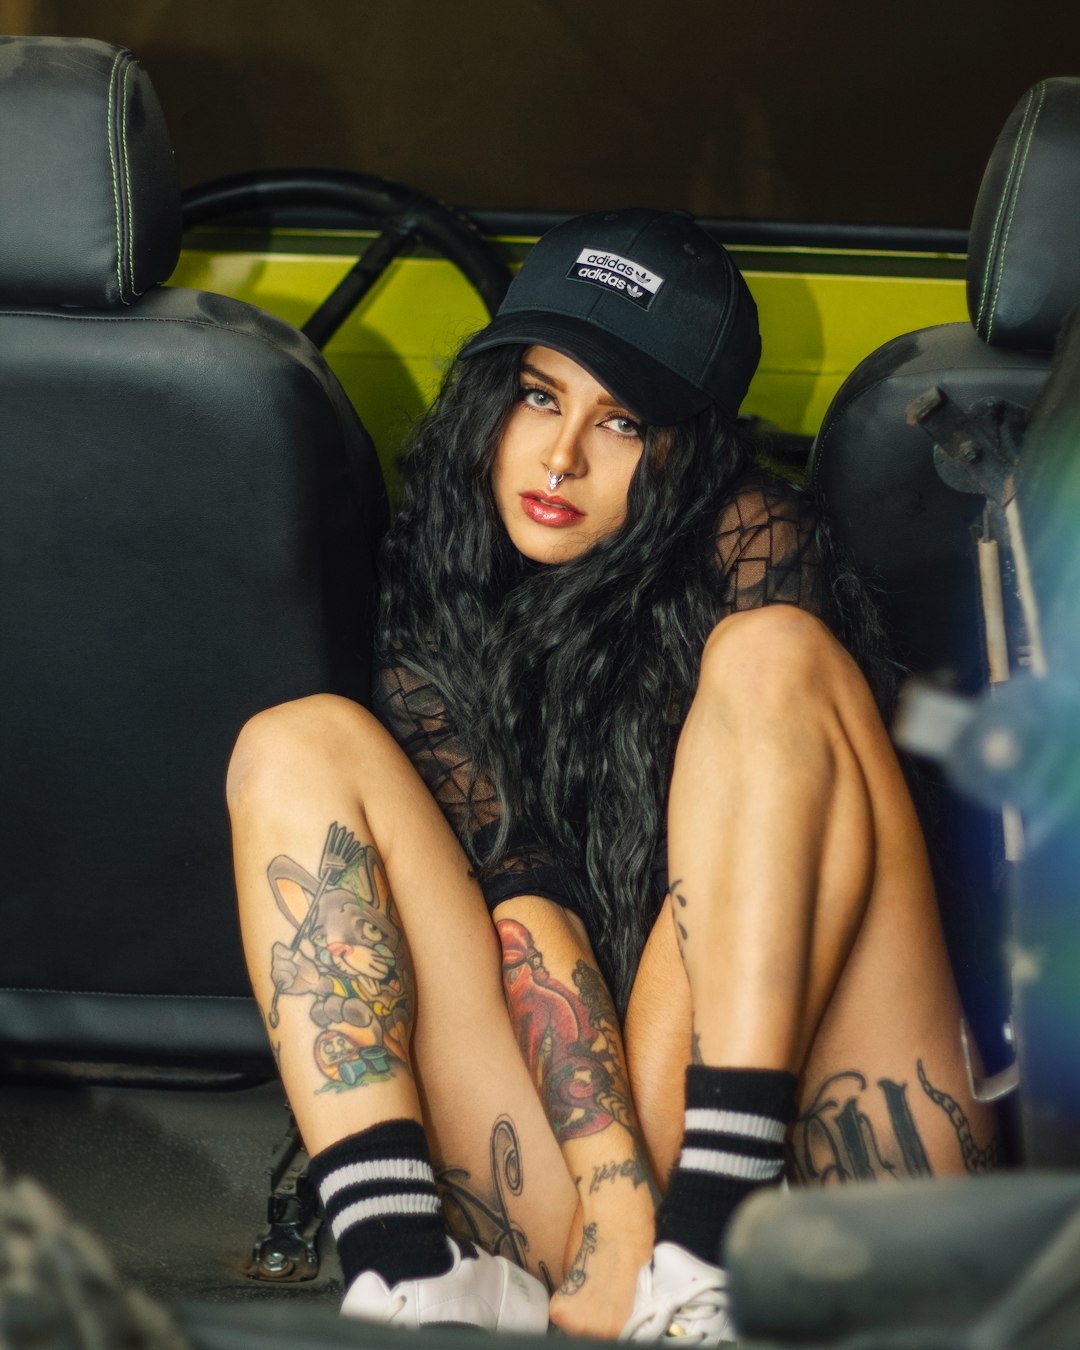 woman in black tank top and black shorts sitting on black leather car seat